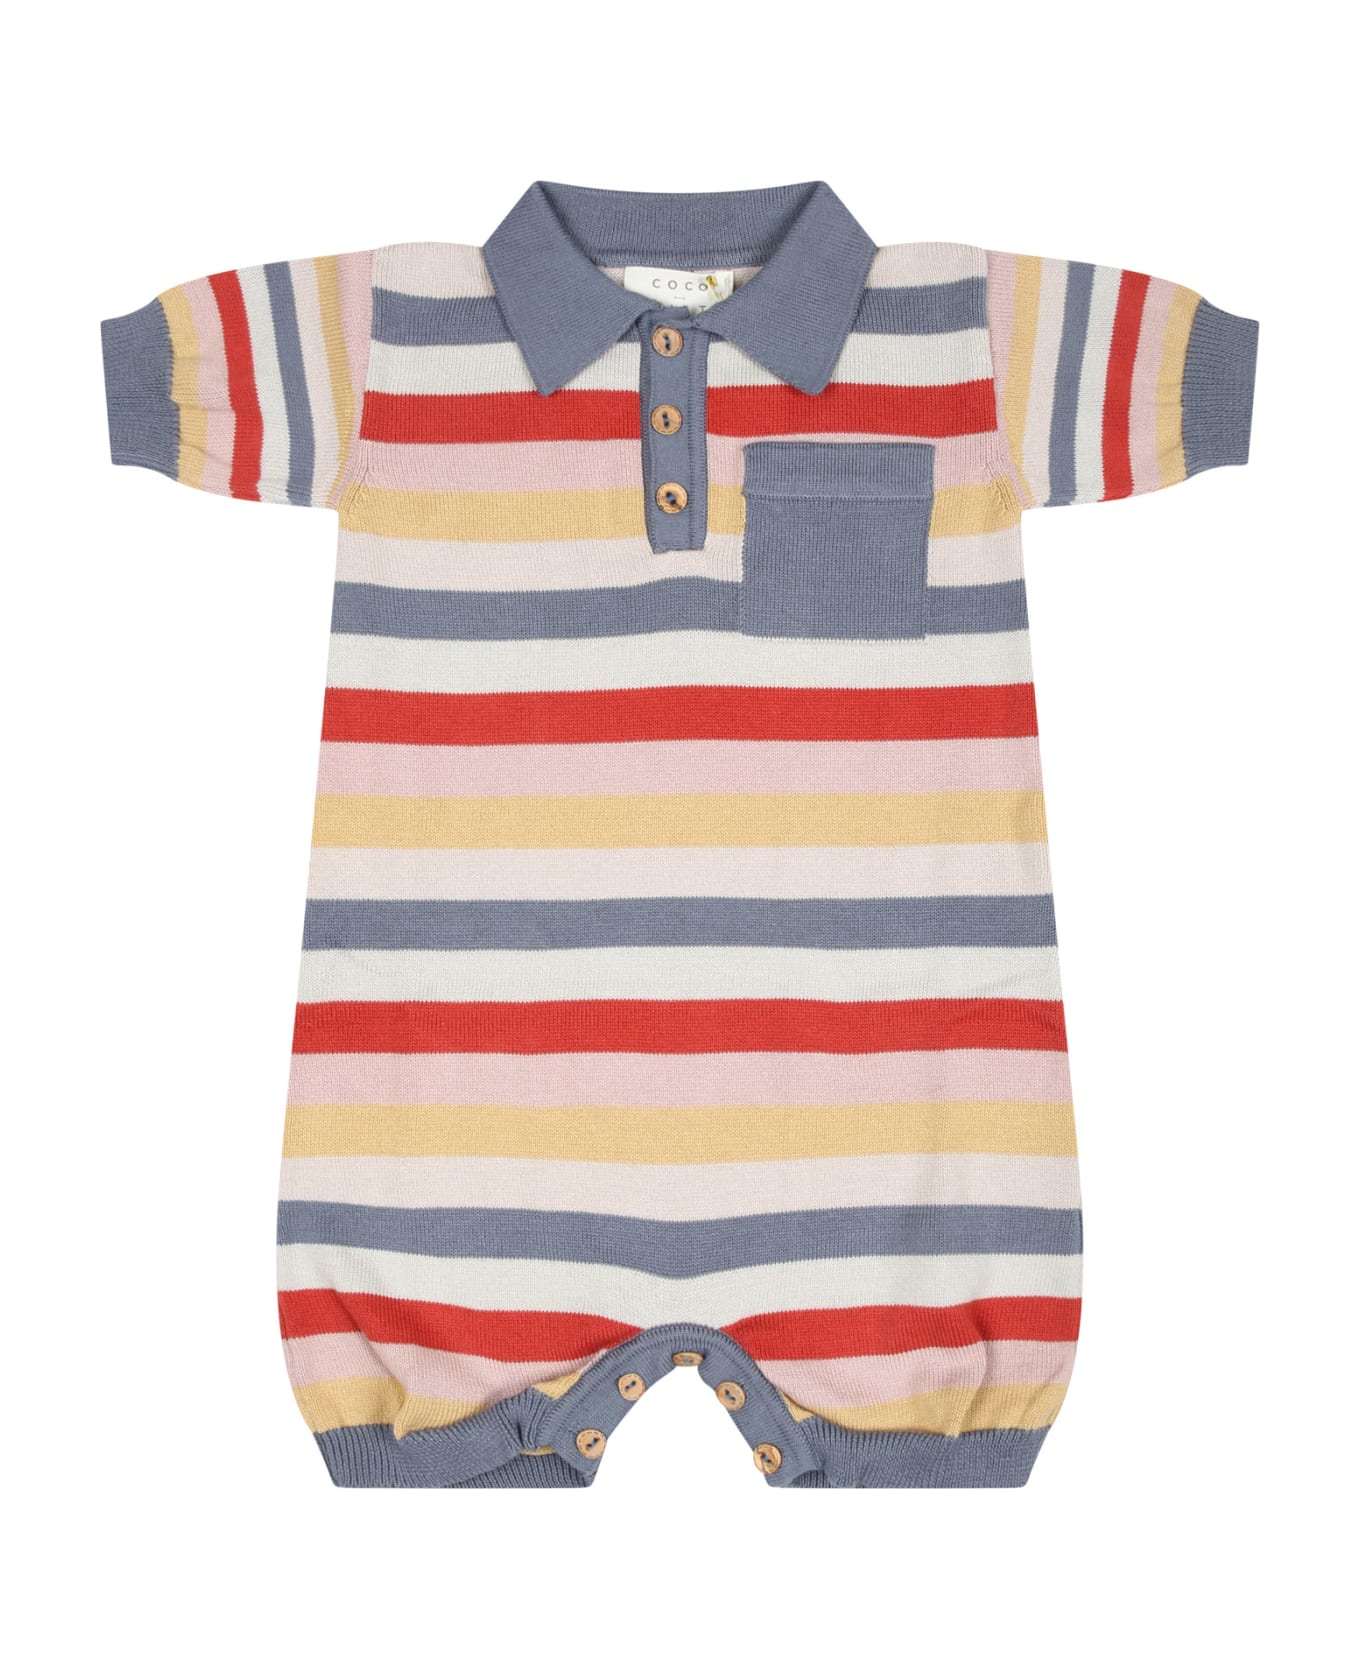 Coco Au Lait Multicolor Romper For Baby Boy With Striped Pattern - Multicolor